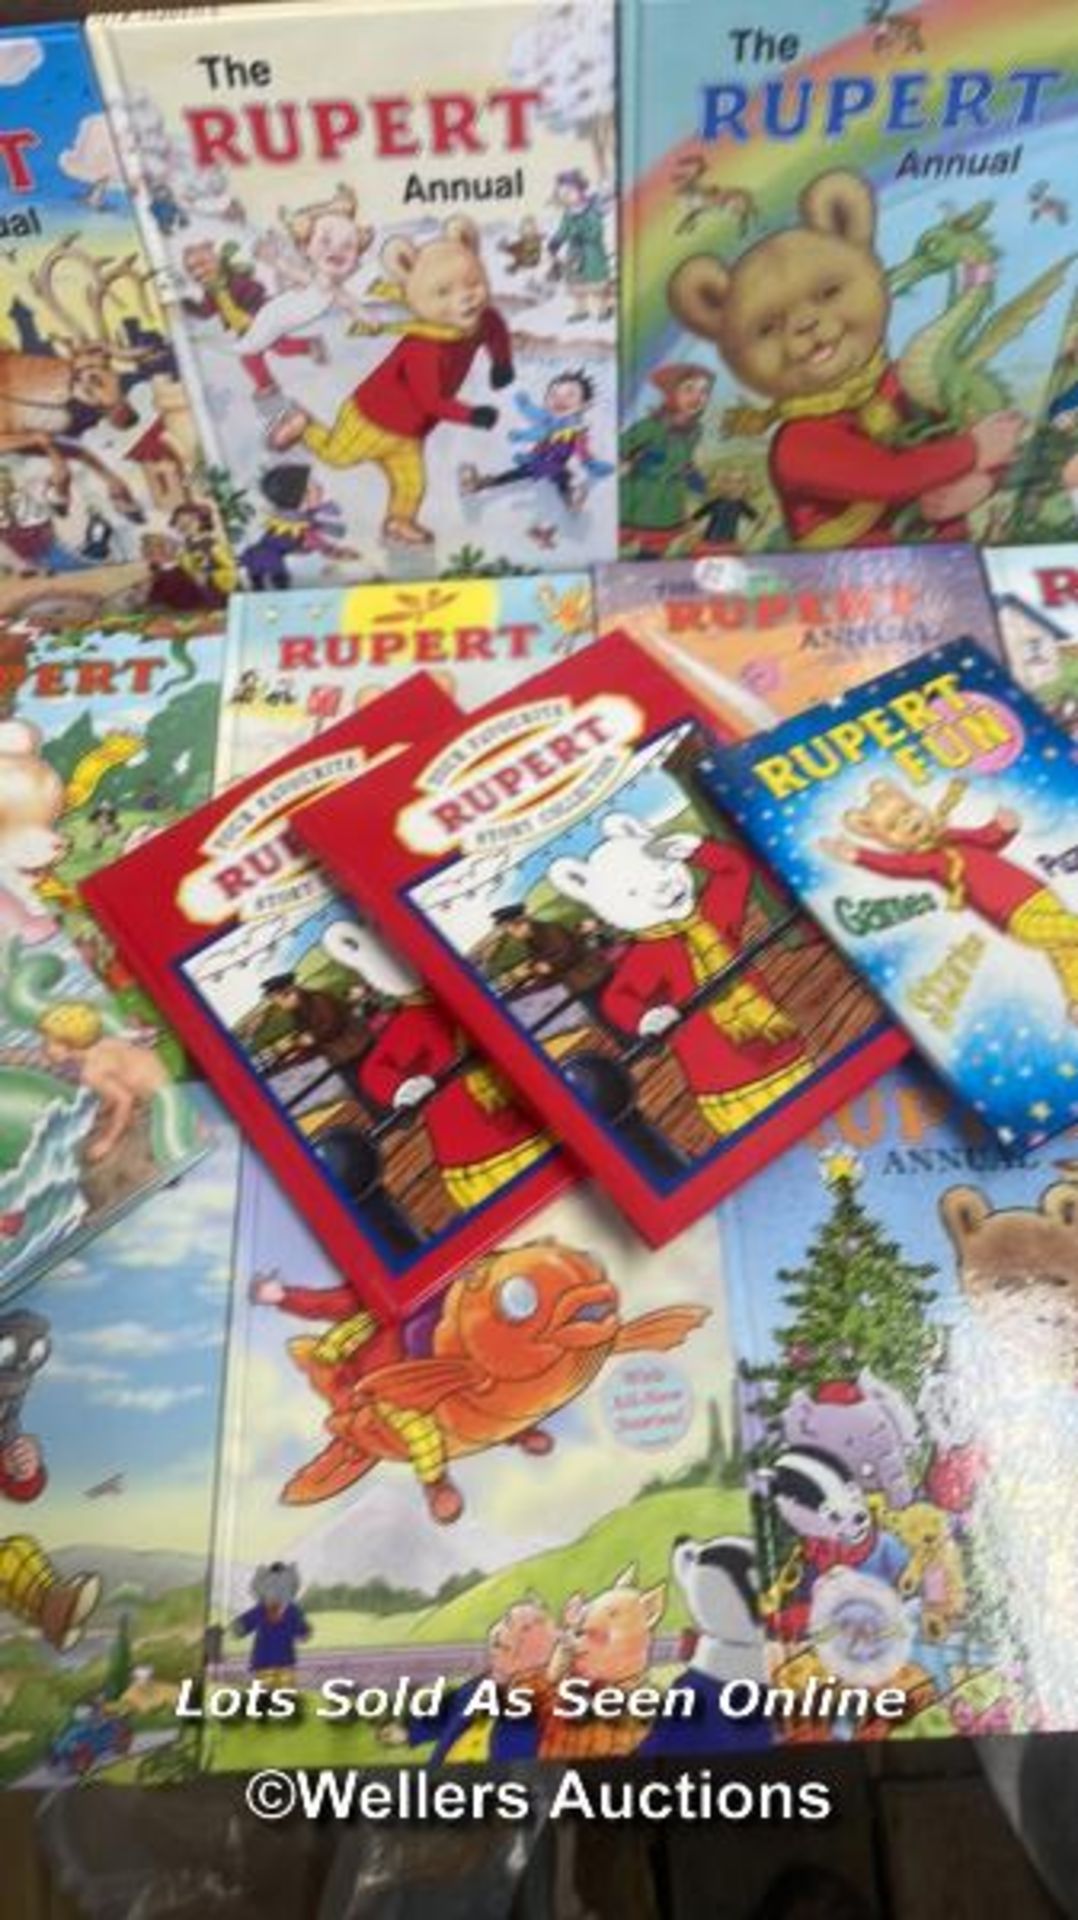 A COLLECTION OF MODERN 1990'S - 2000'S RUPERT BEAR BOOKS AND ANNUALS INCLUDING 1959 ANNUAL LIMITED - Image 6 of 7